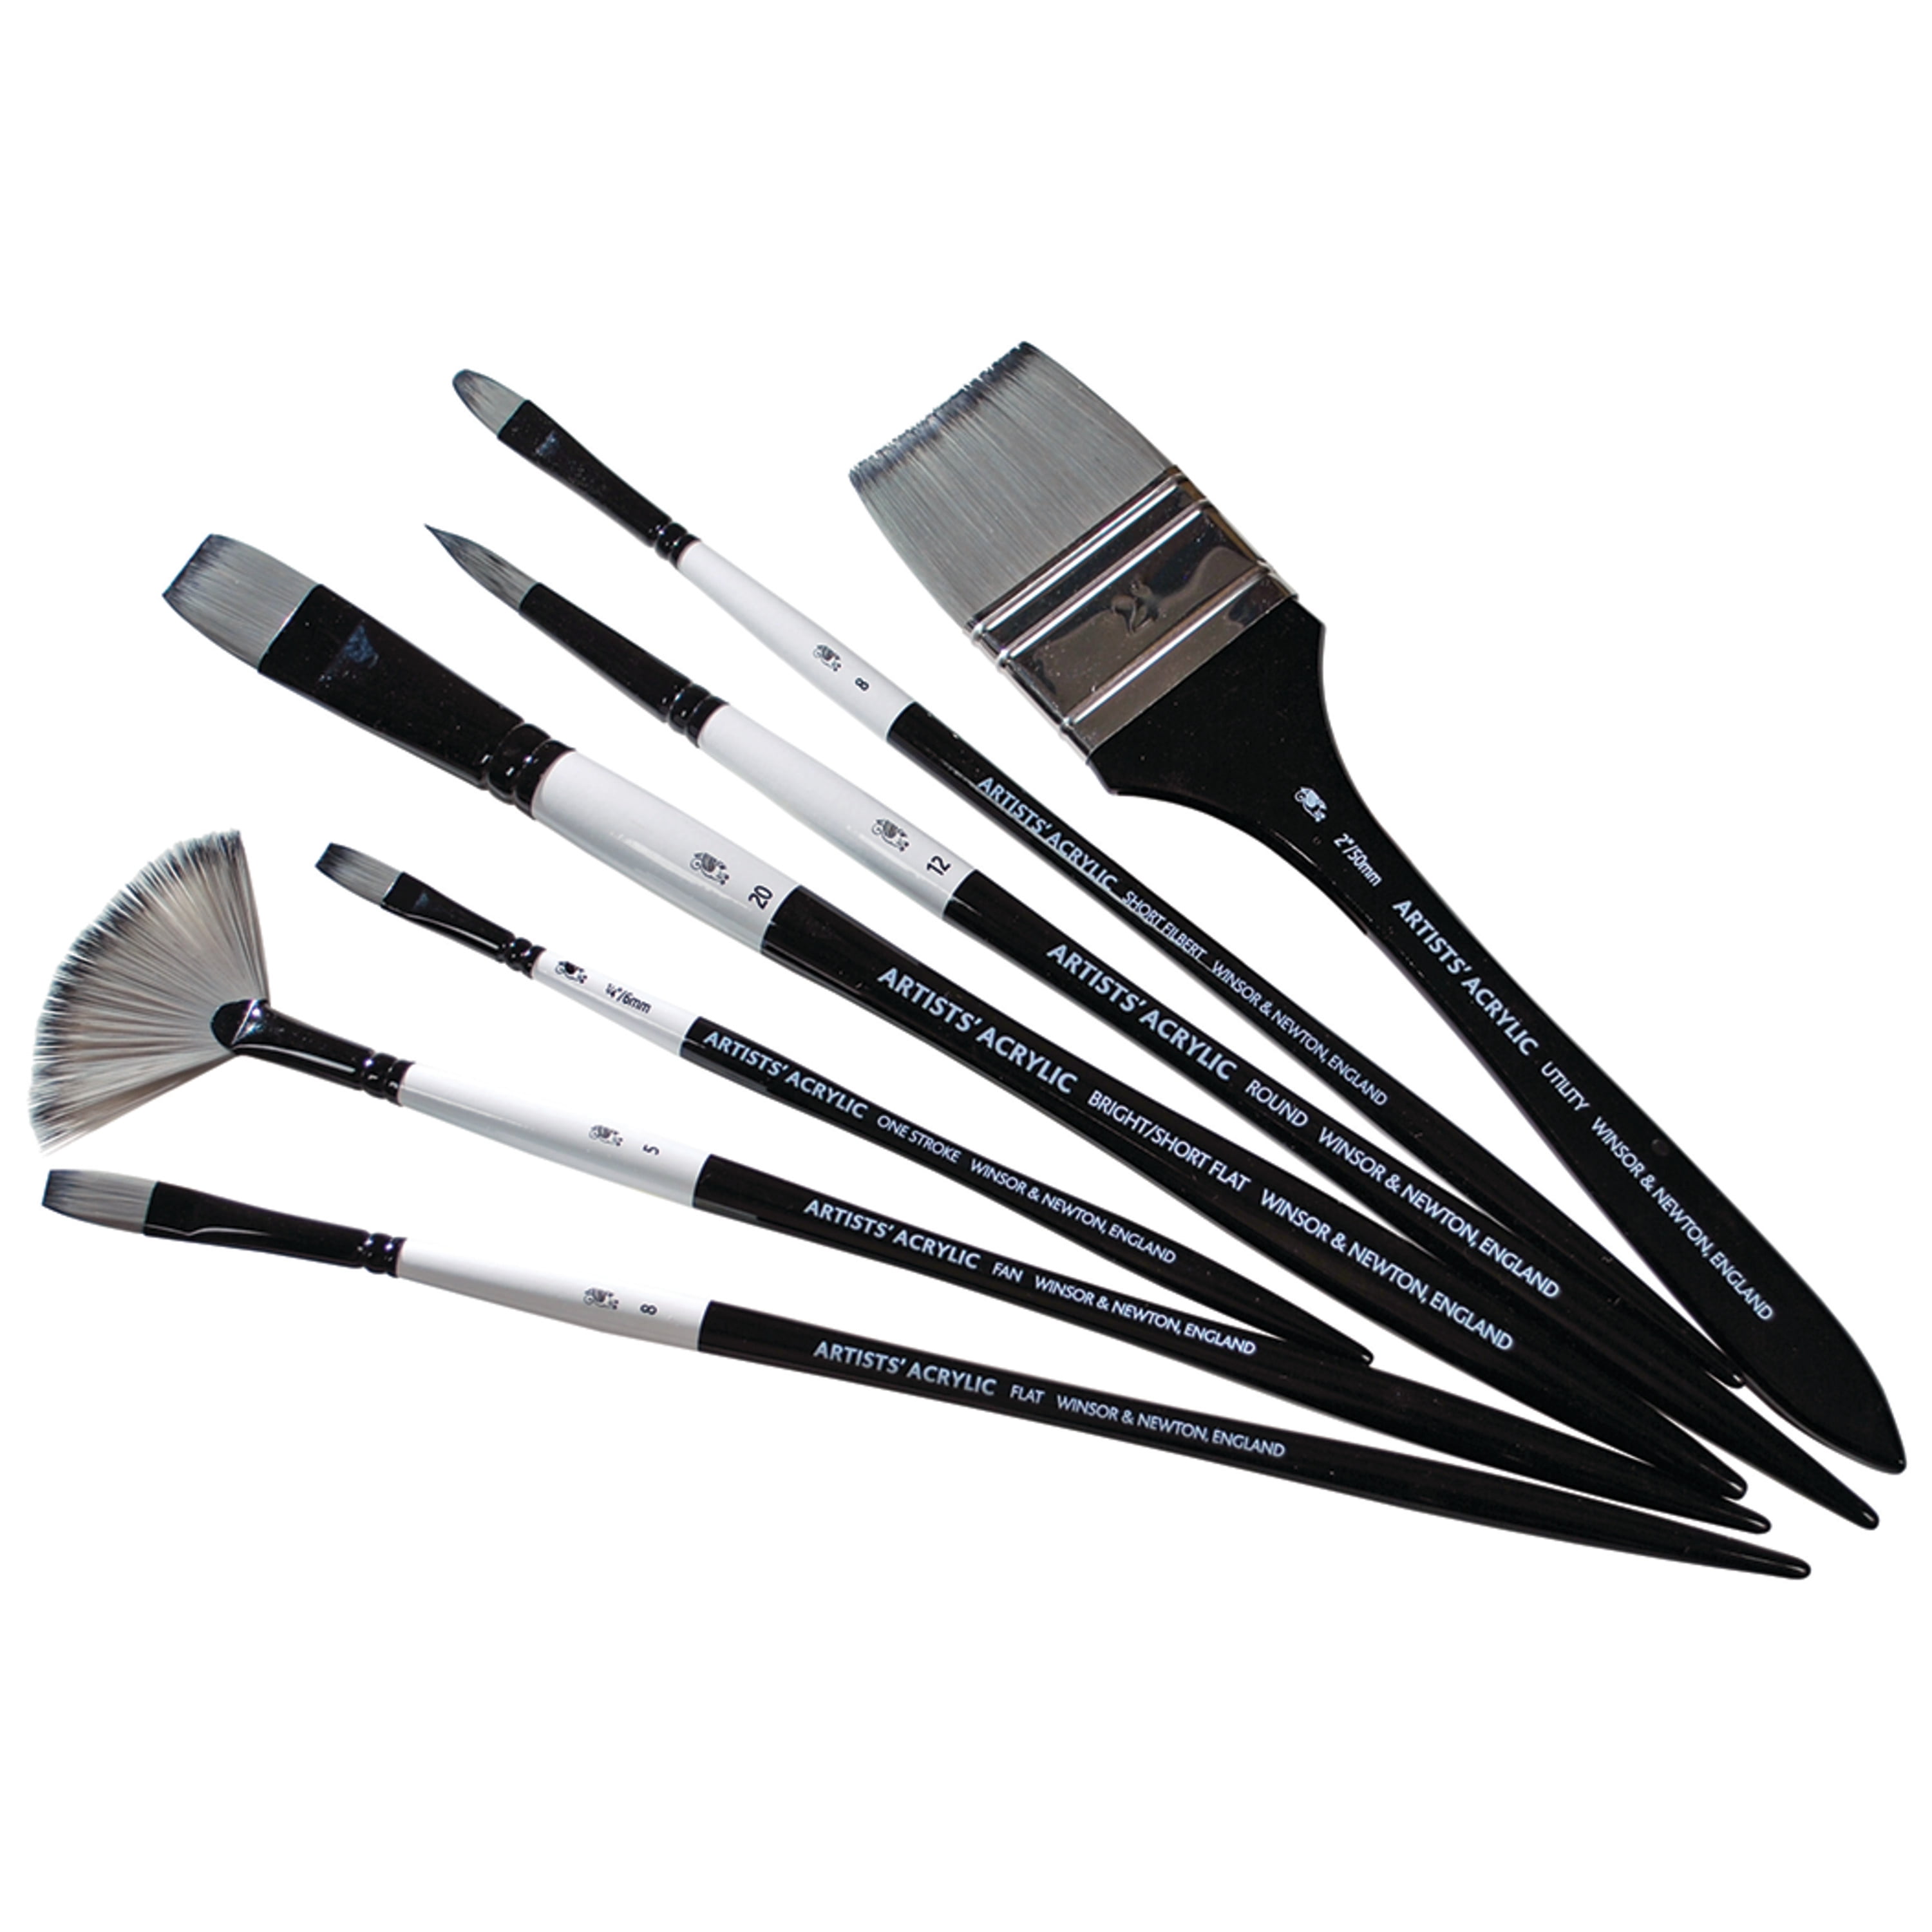 Winsor Newton Brush Set Brights Sizes 2*,4,6,8,12 List $95.NOW ONLY $42.95